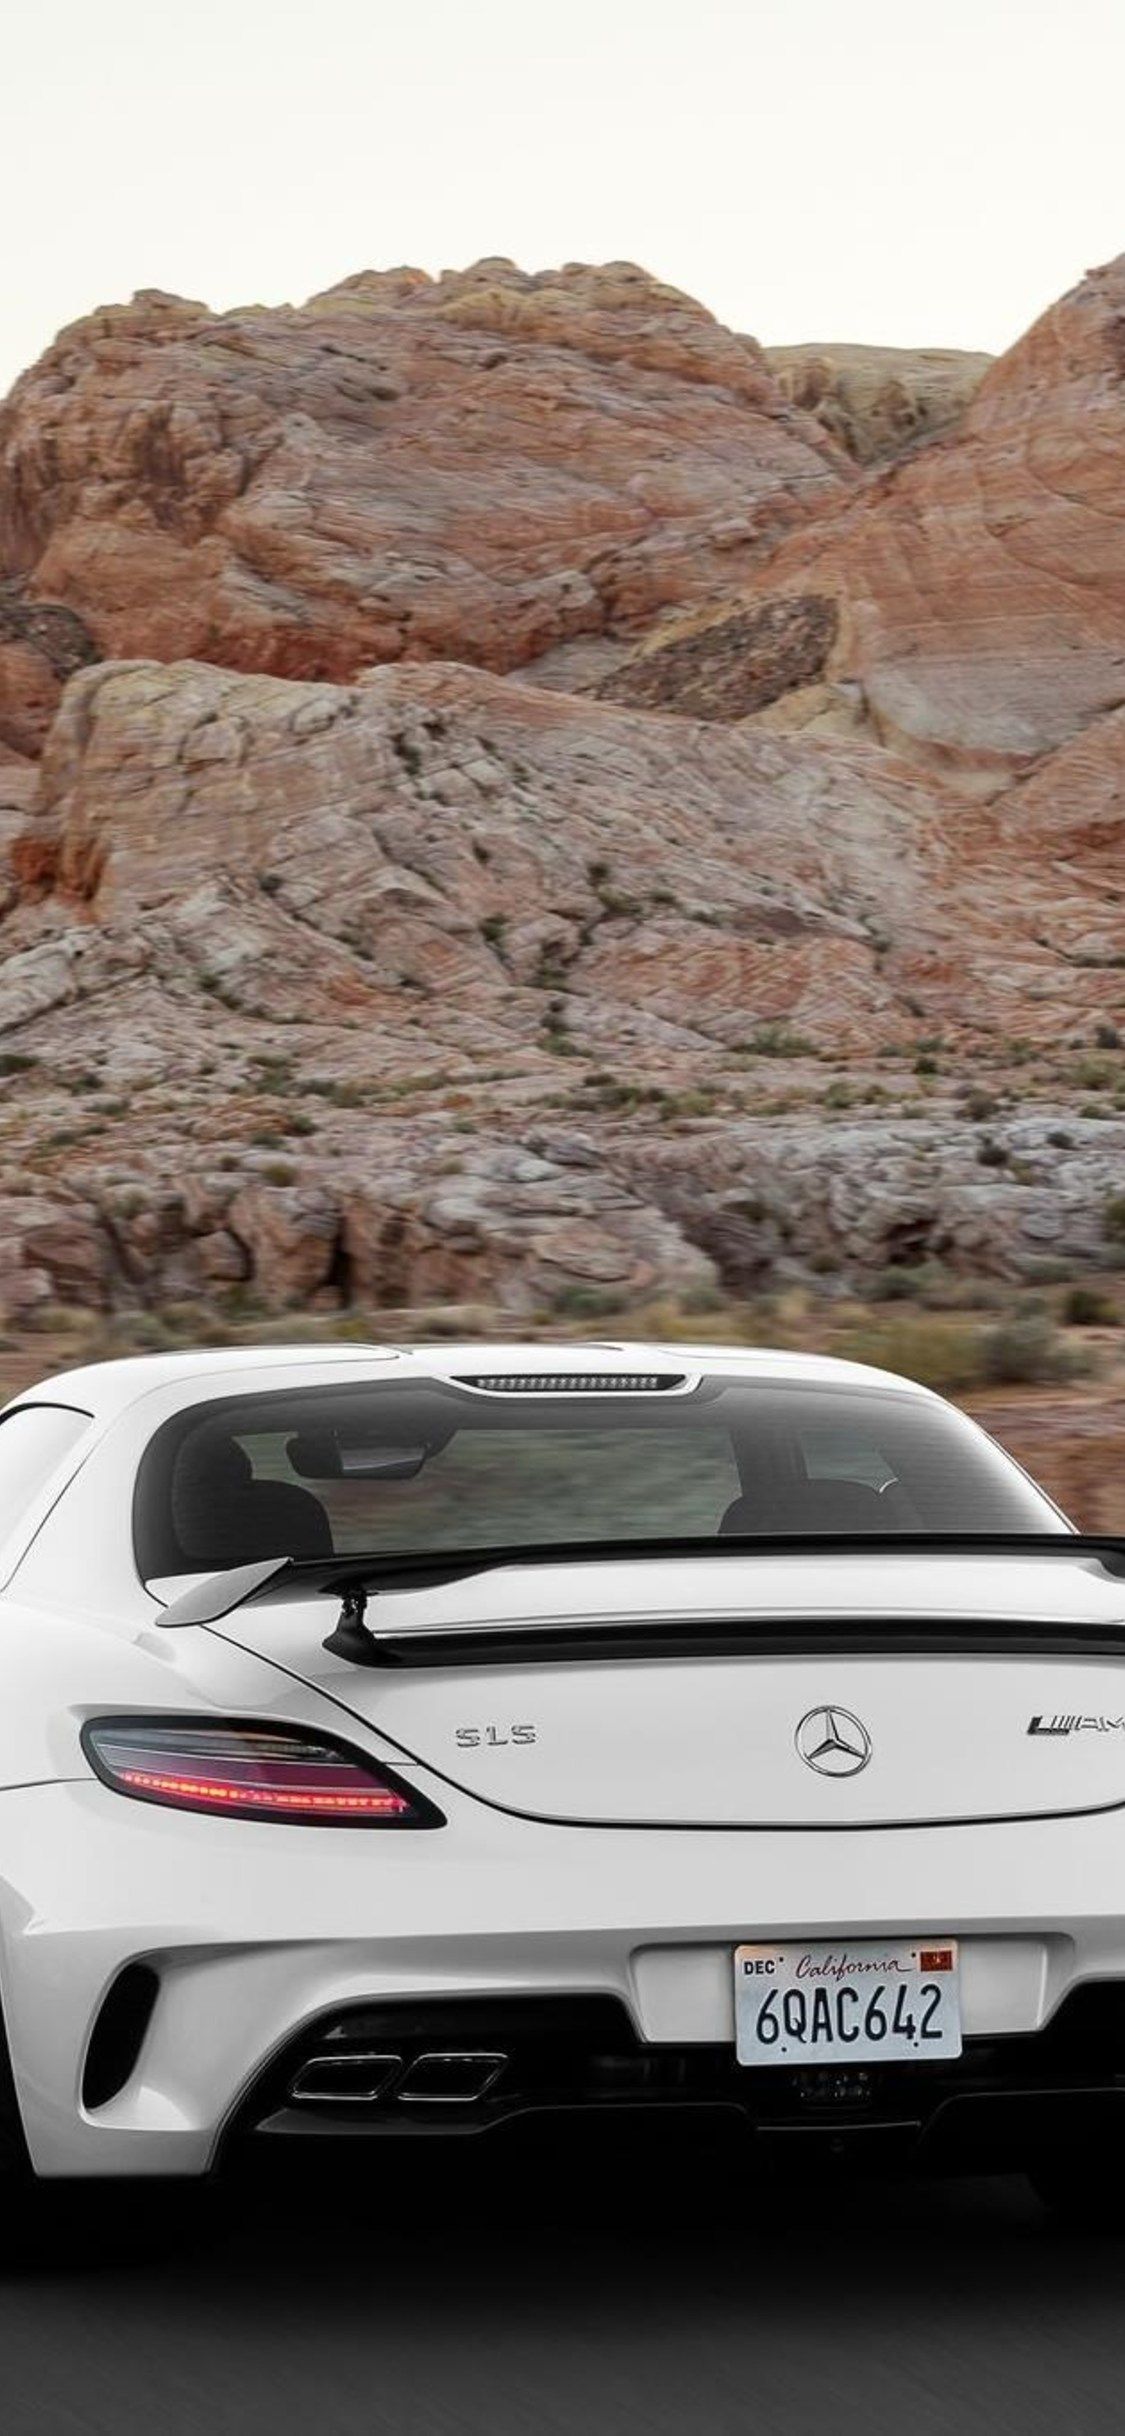 Iphone Xs Mercedes Amg Wallpapers